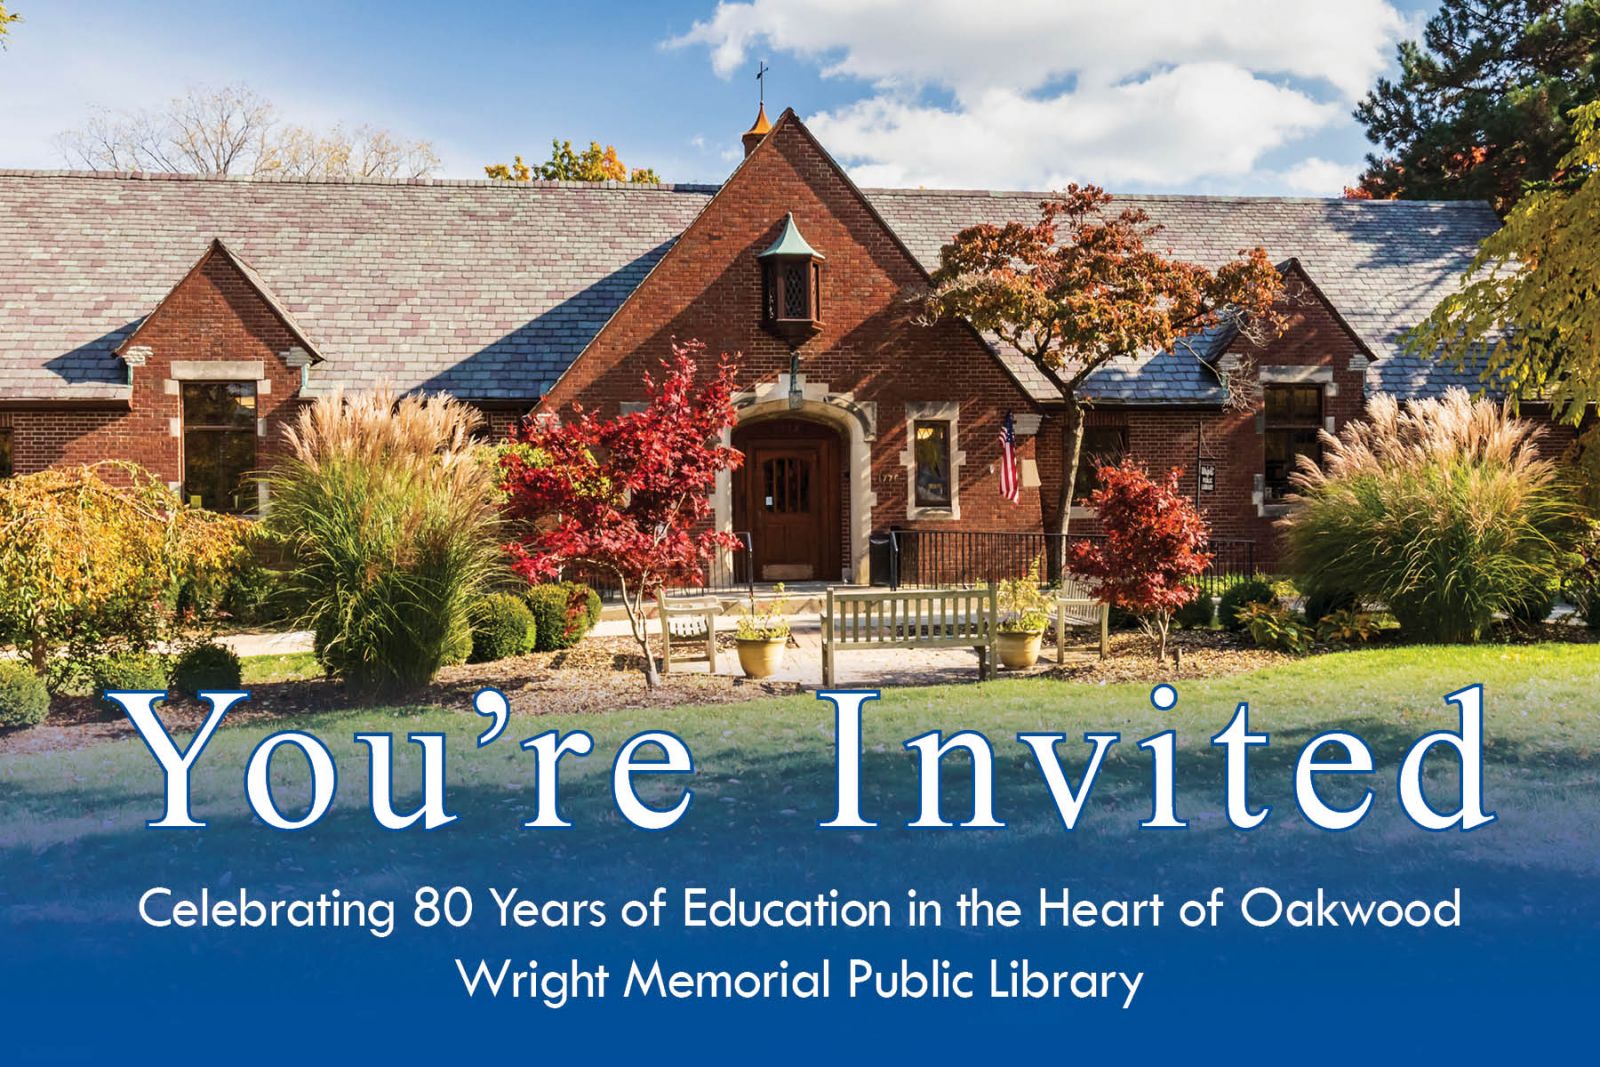 You're invited to celebratie 80 years of education in Oakwood